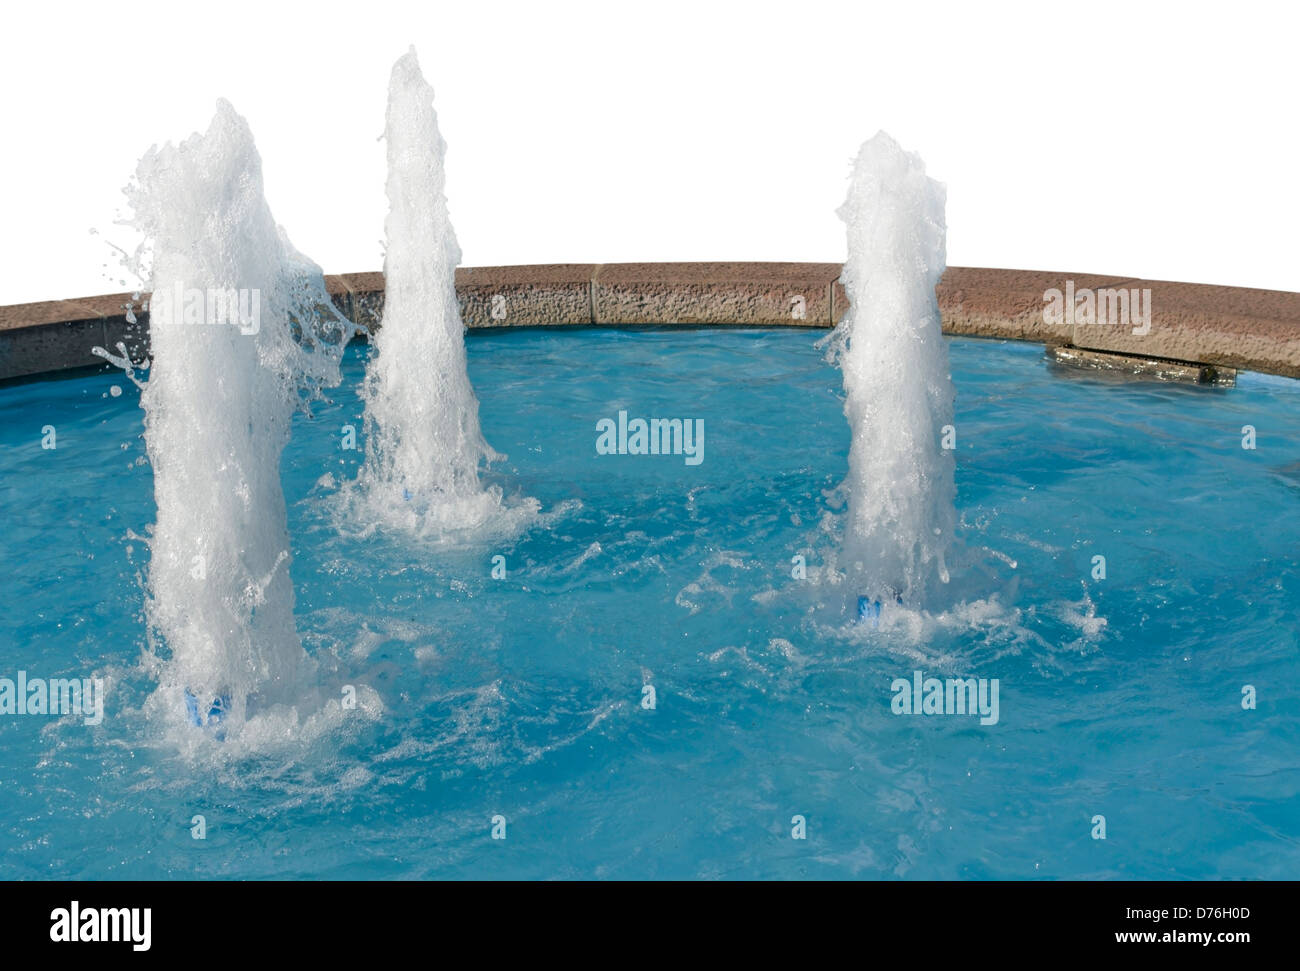 water scenery with 3 small fountains in white back Stock Photo